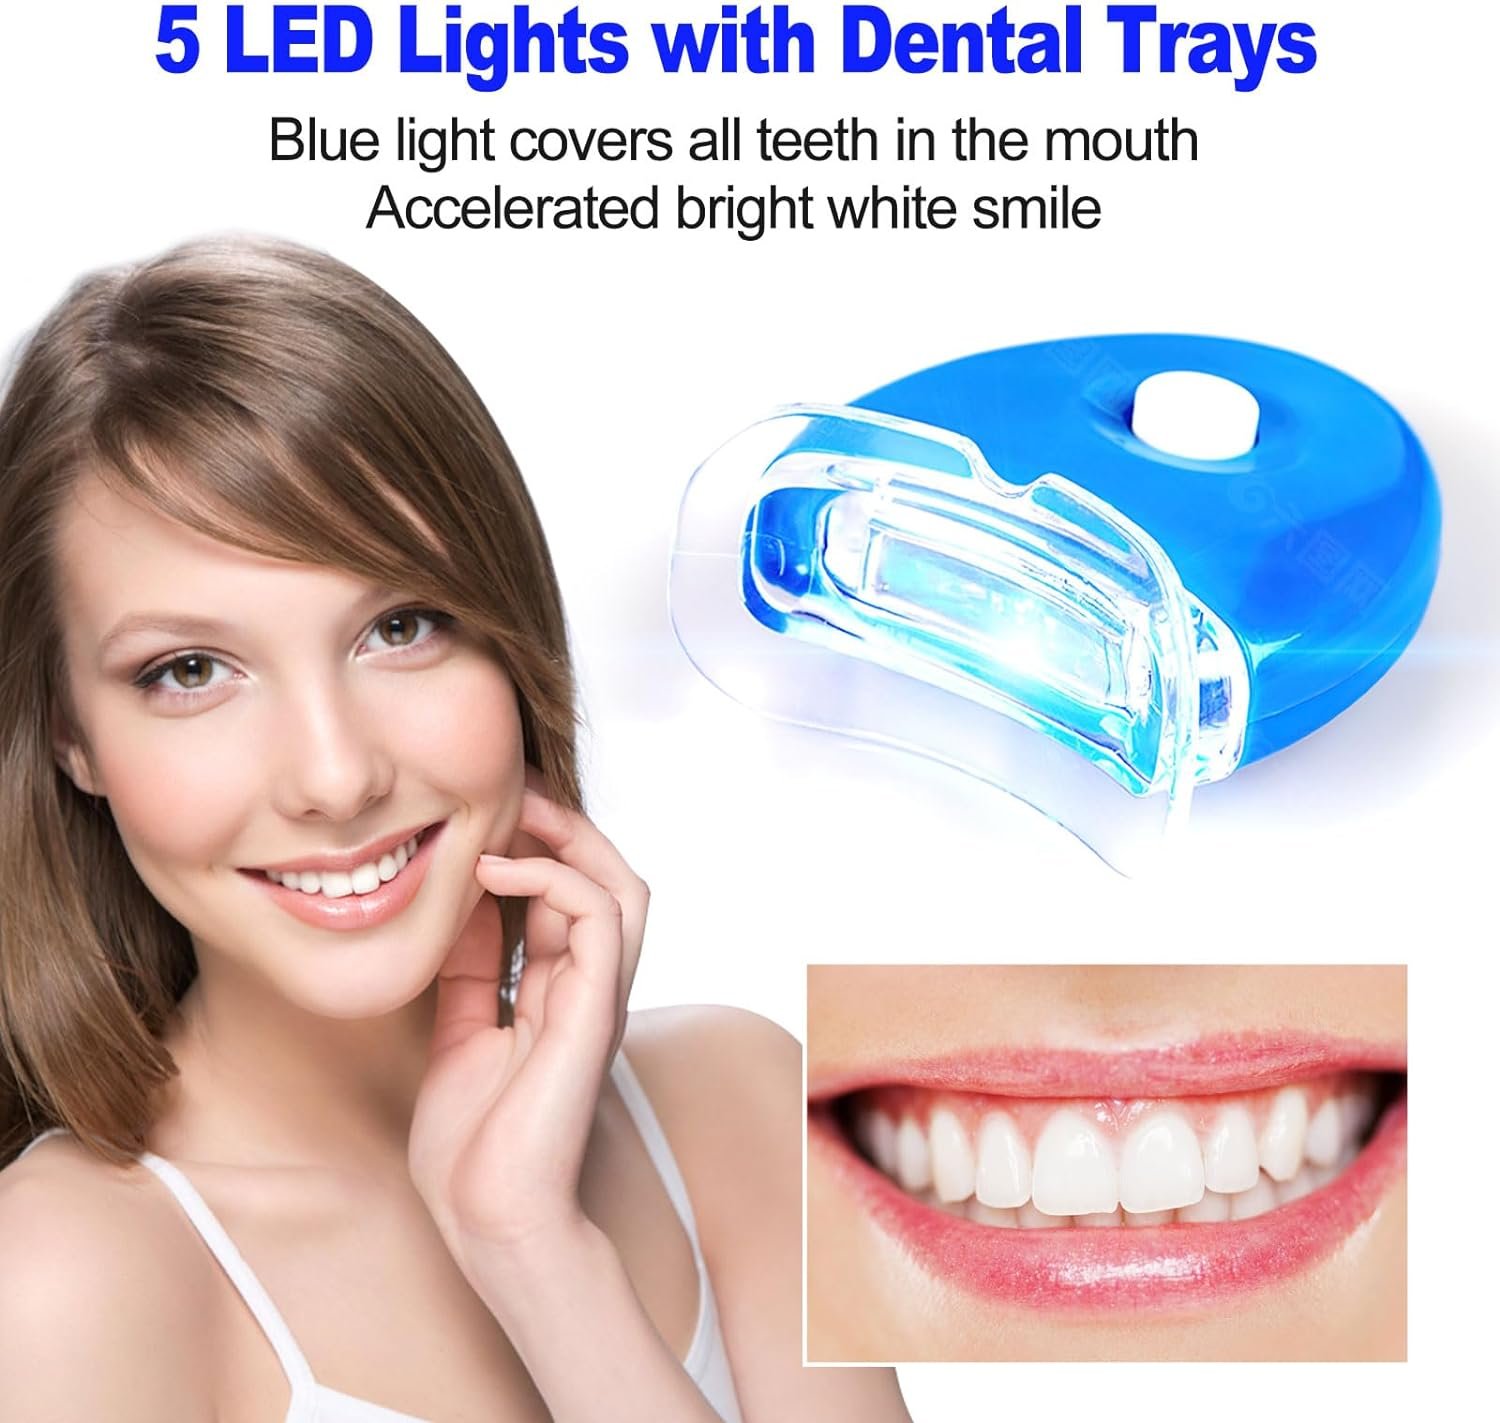 Teeth Whitening Accelerator Light, with Mouth Tray and Case, 5 Blue LED Teeth Whitening Light,Wireless Teeth whitening LED Light | White